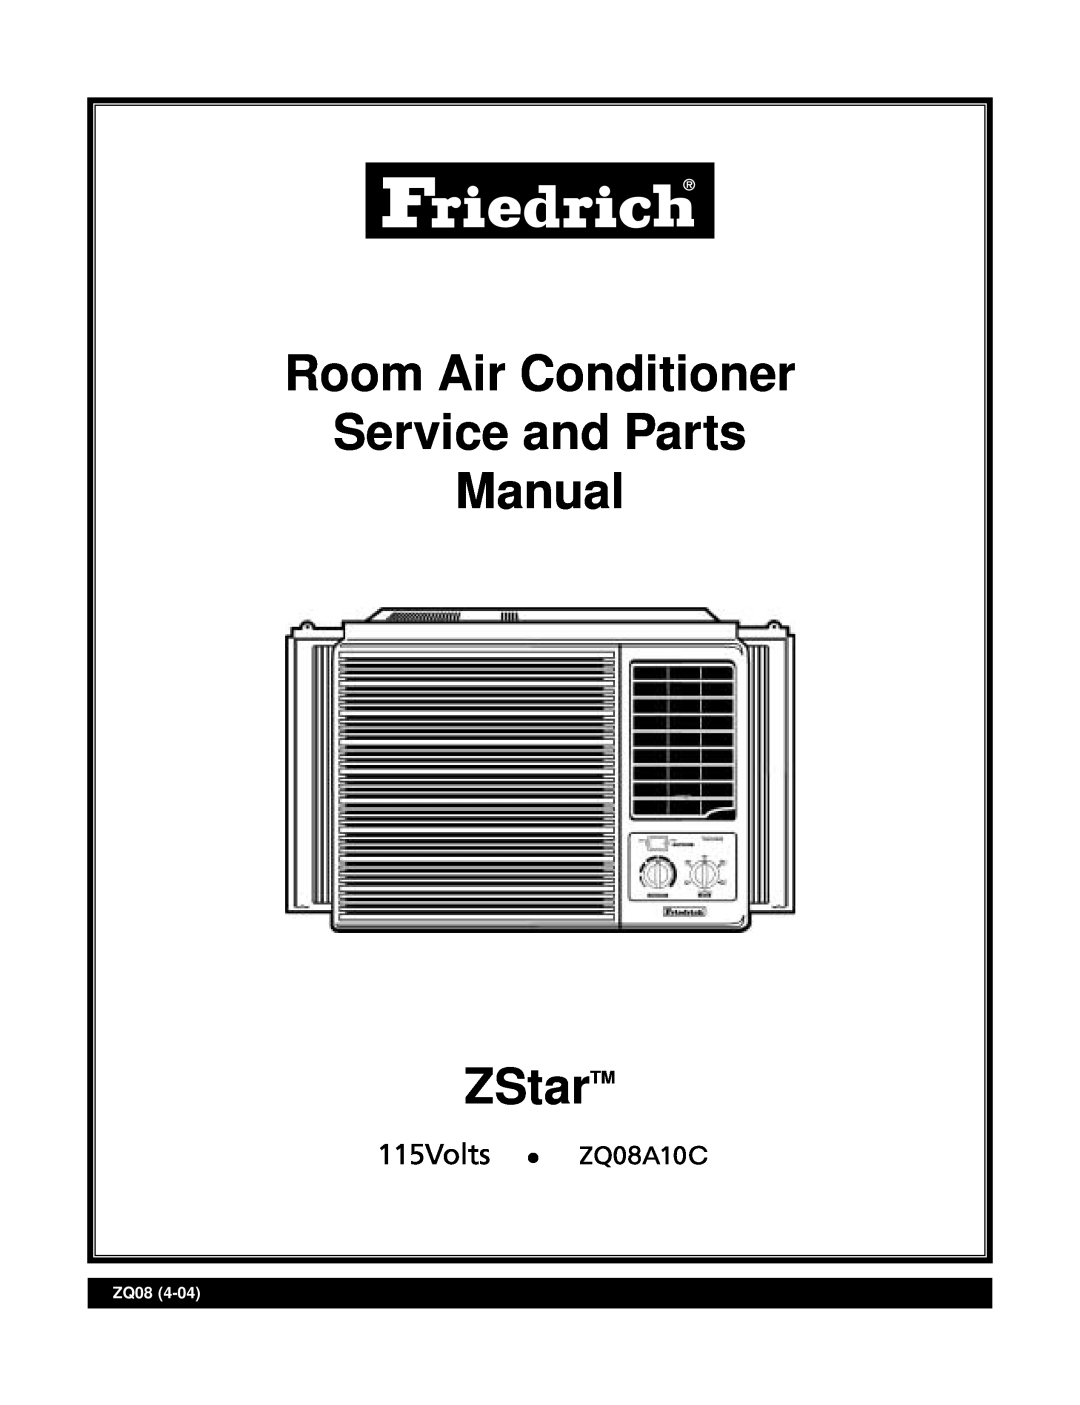 Friedrich ZQ08A10C manual Room Air Conditioner Service and Parts Manual, ZStarTM 